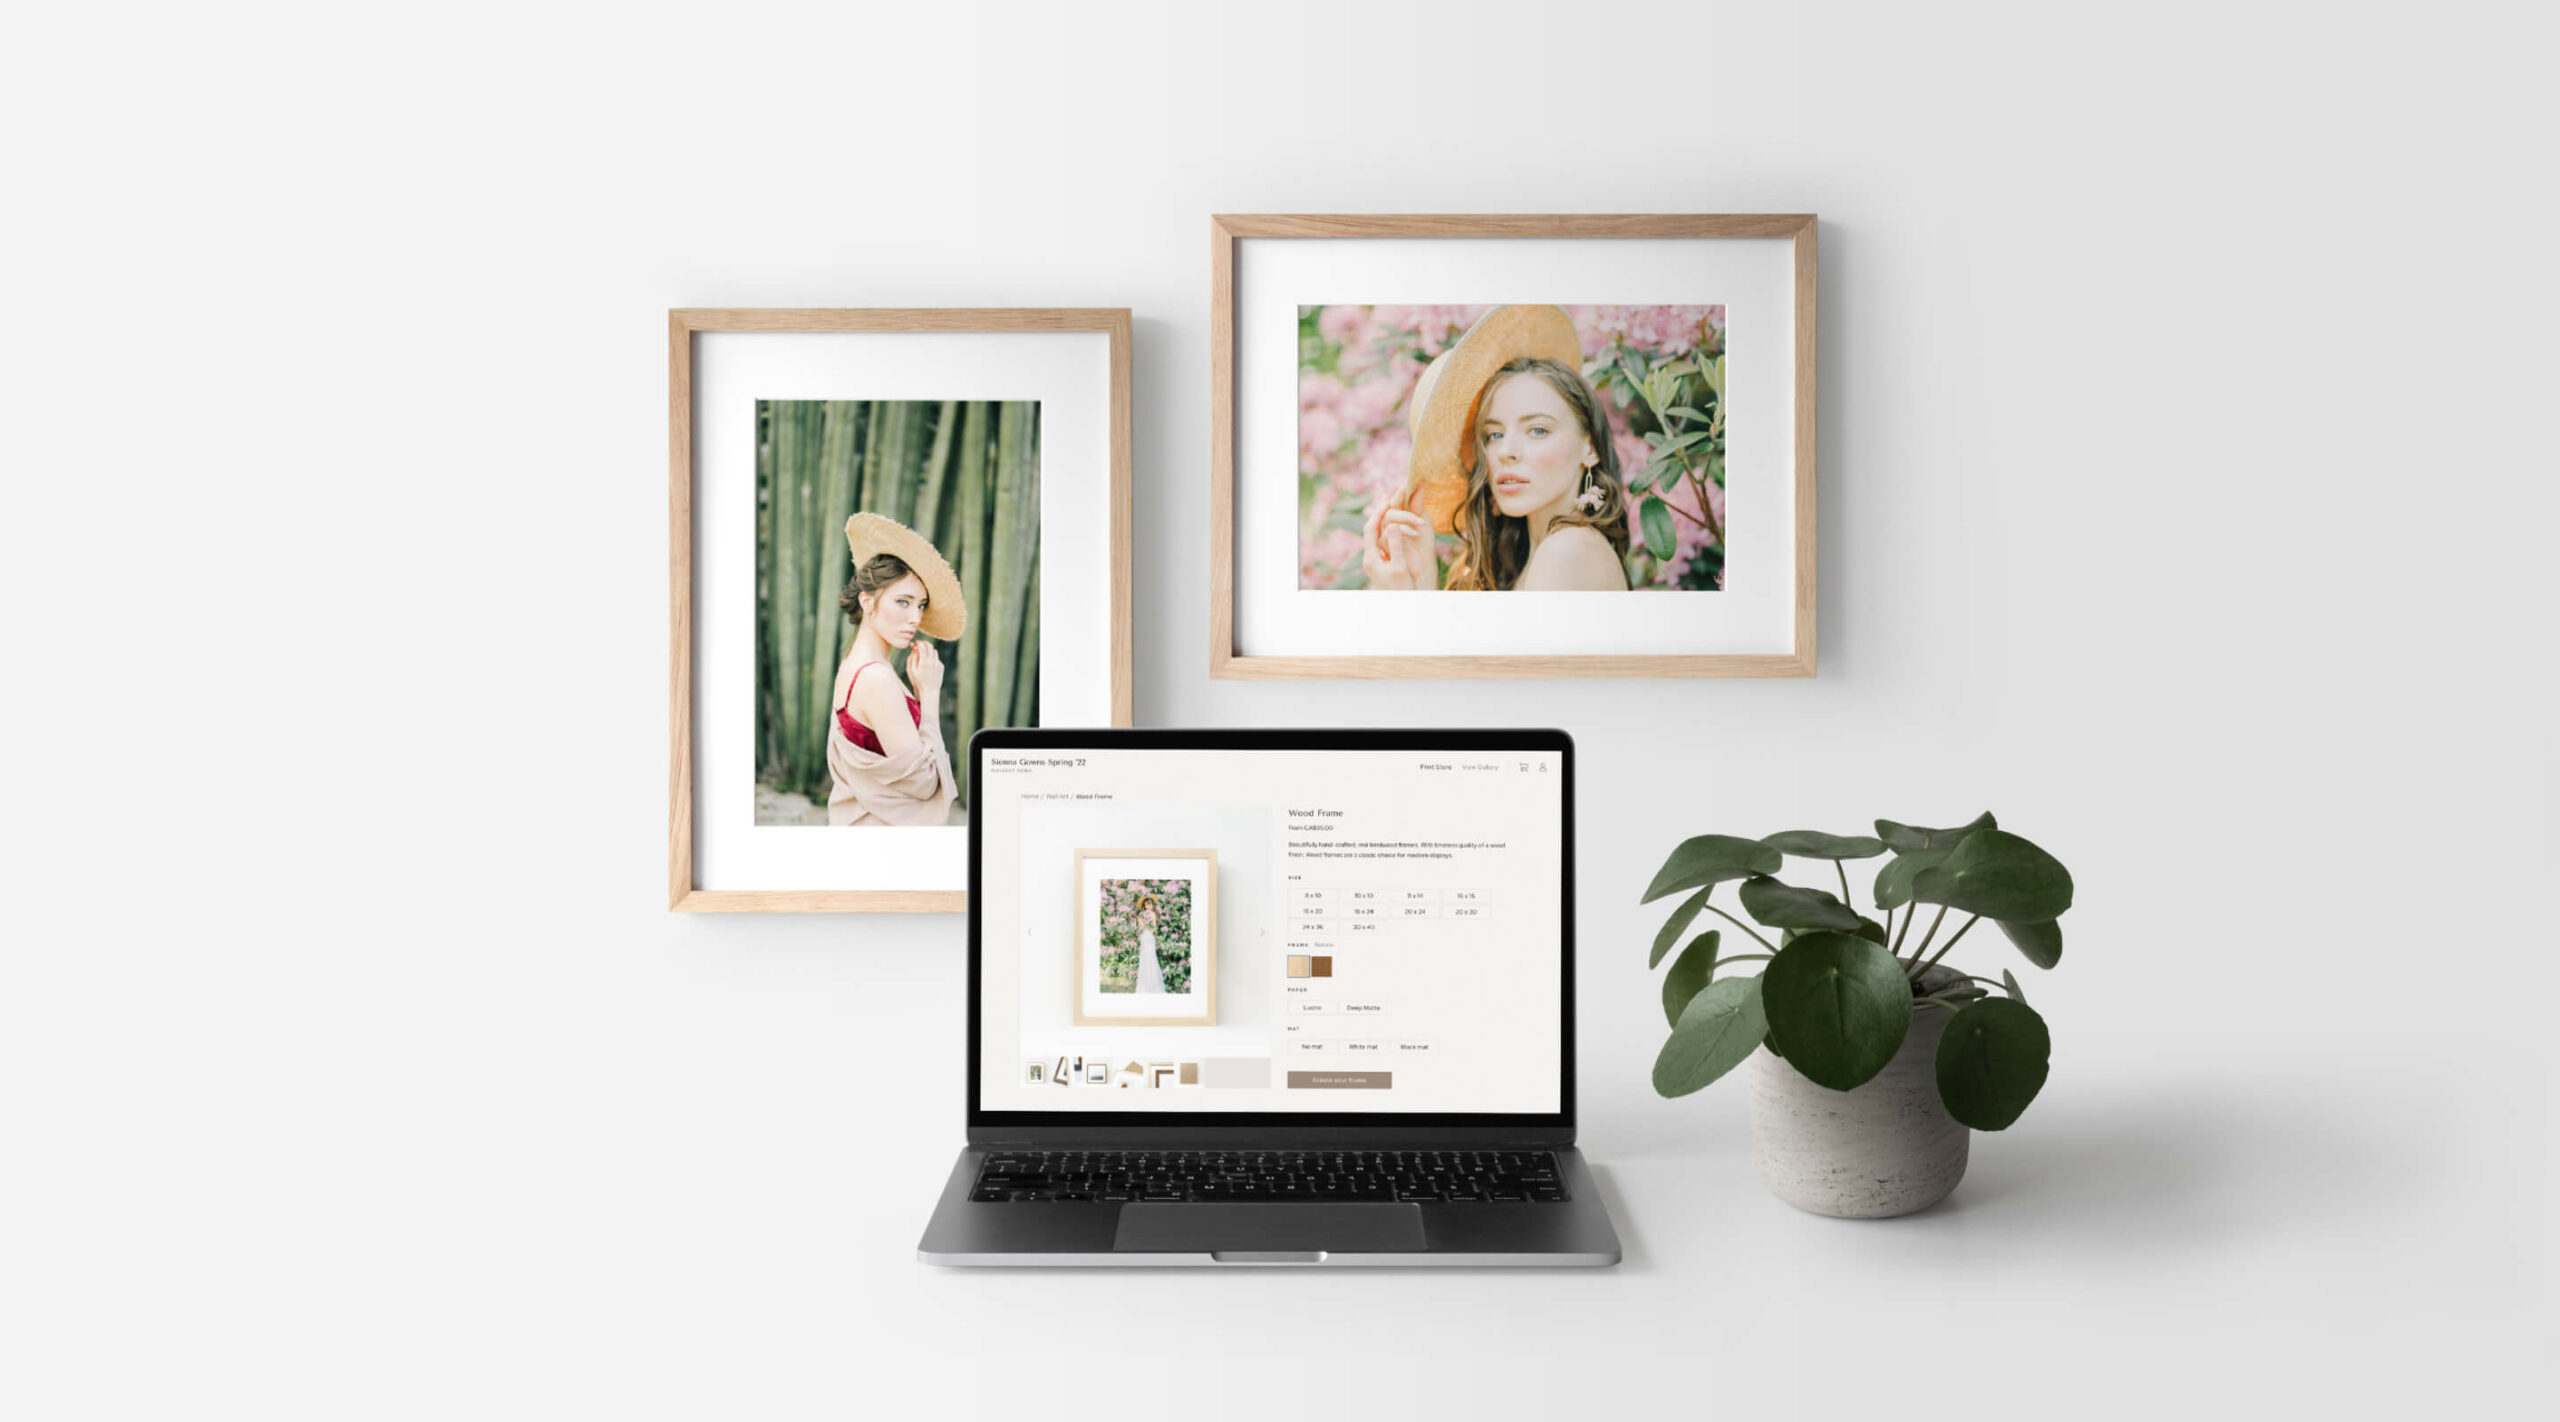 Why-switch-to-Pixieset-Online-Print-Store-for-Photographers-4-reasons